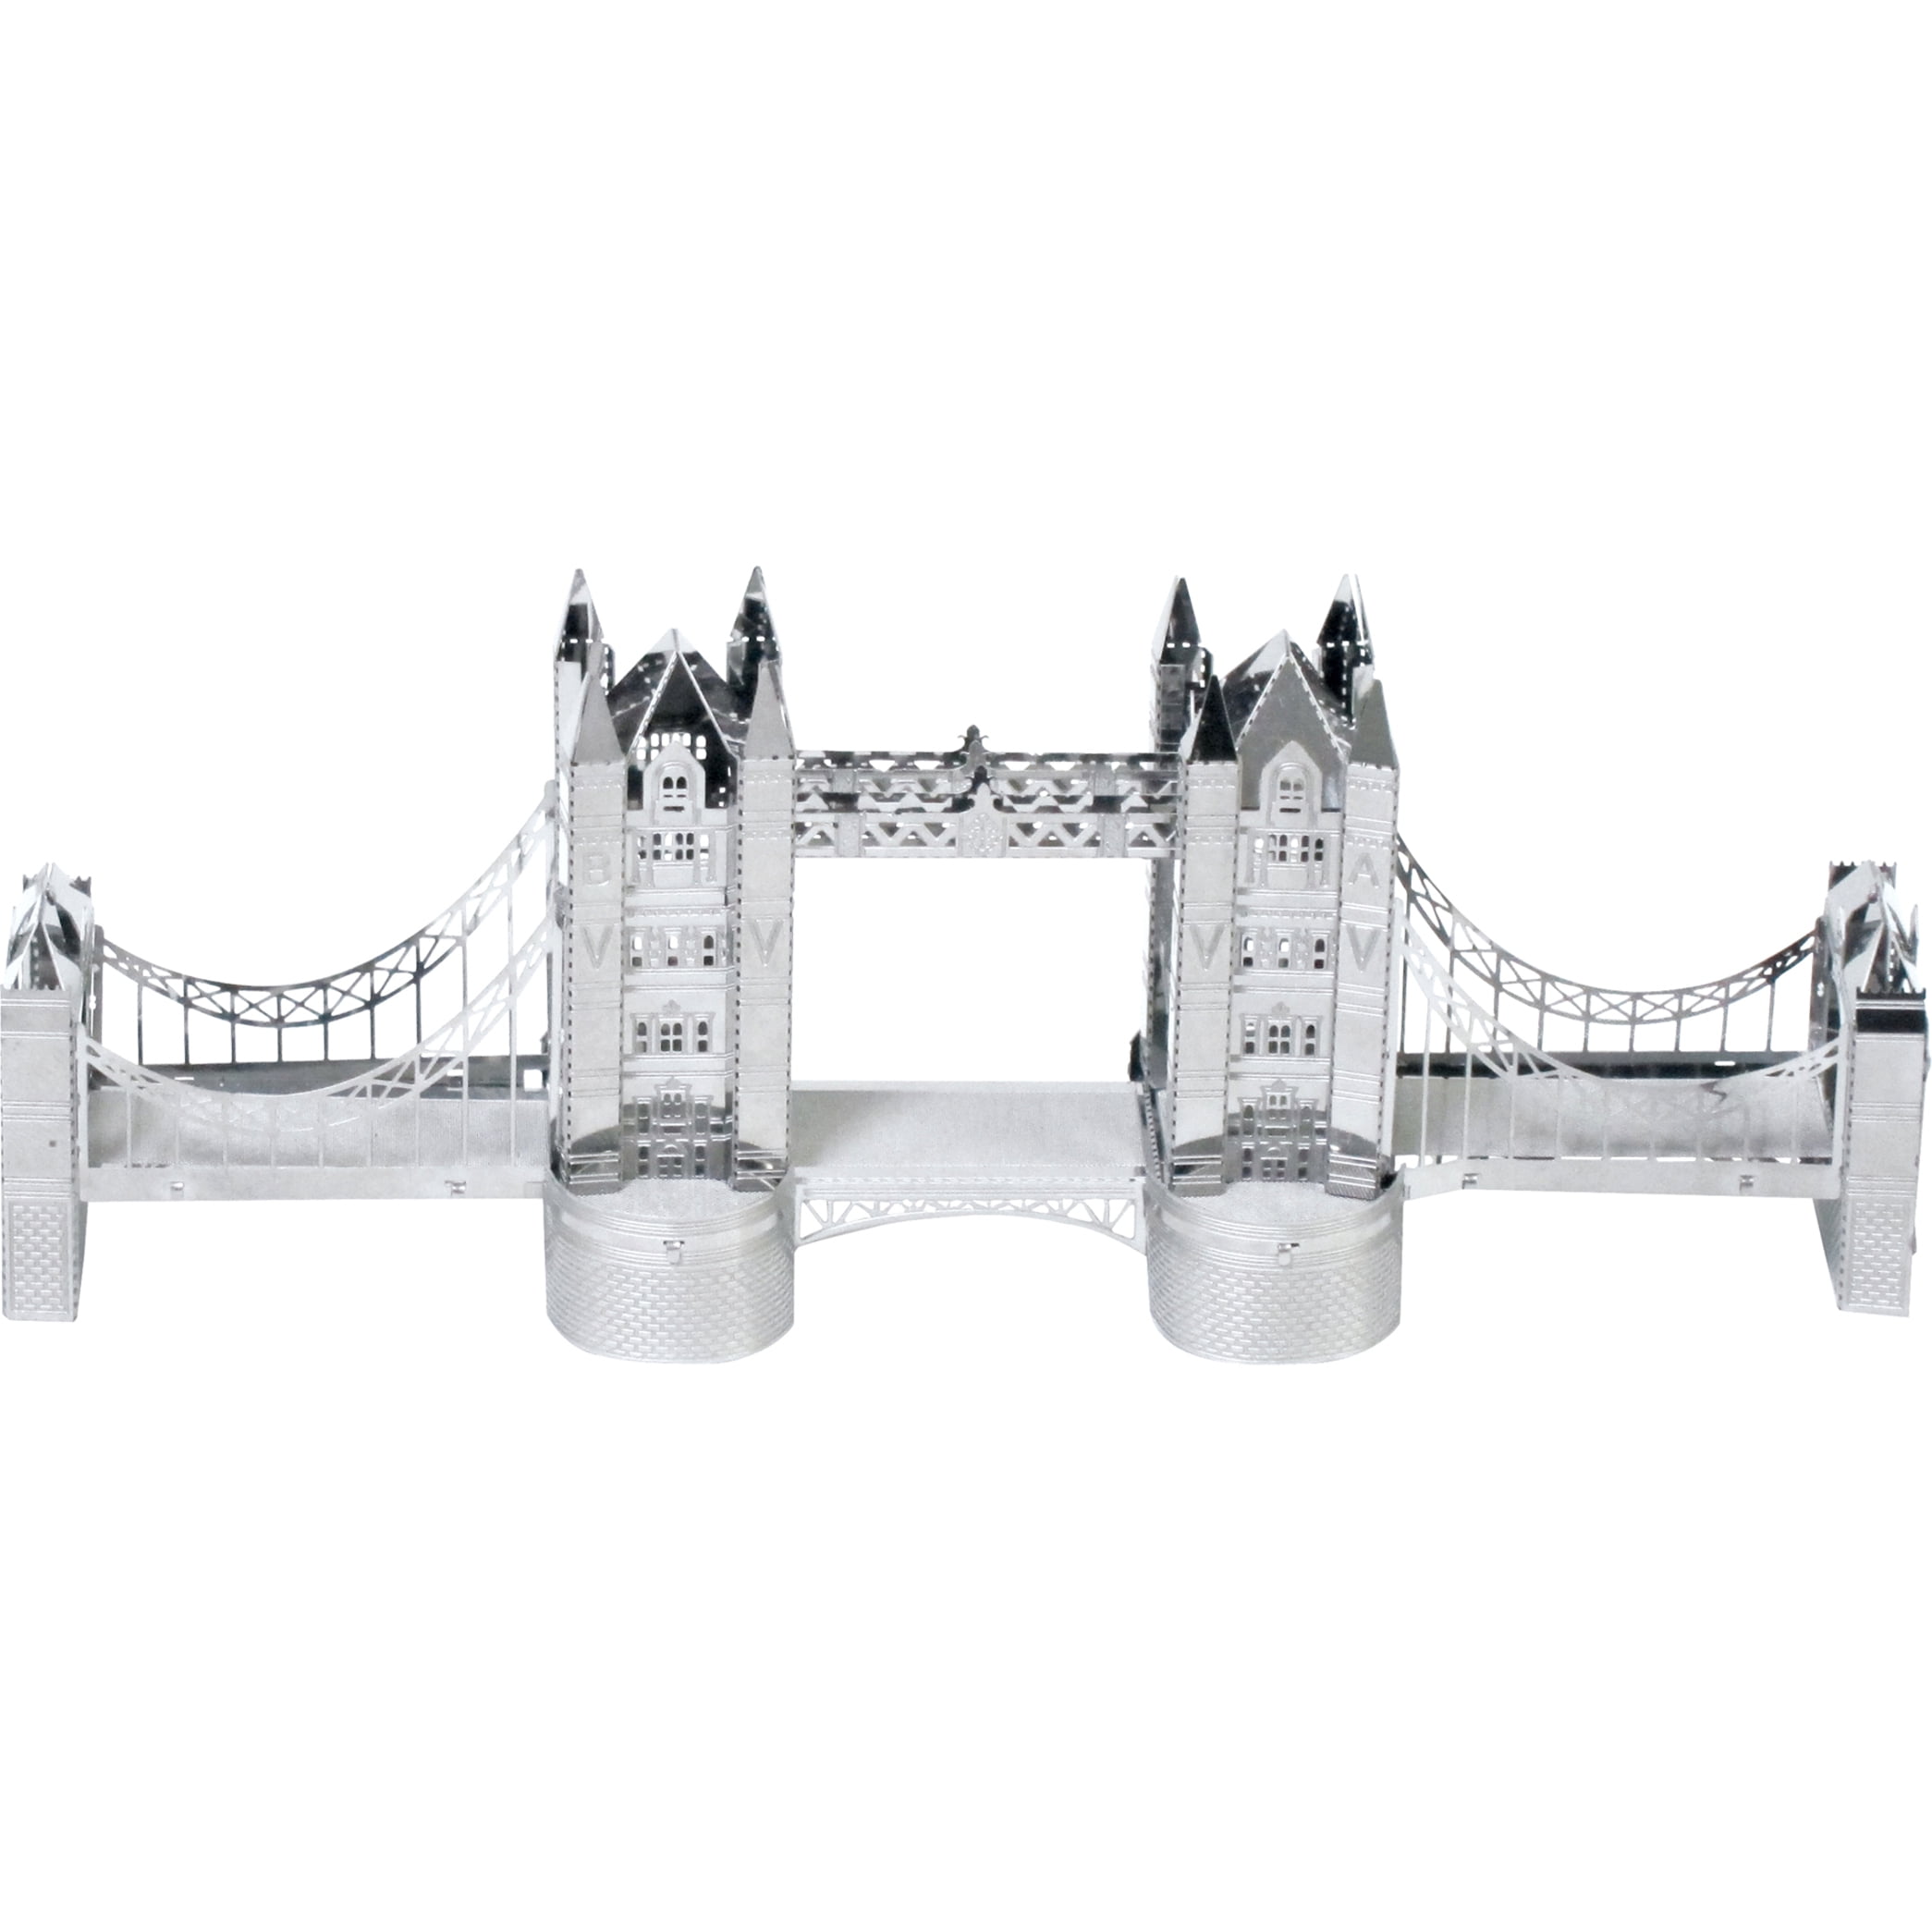 Fascinations Metal Earth ICONX Roman Colosseum 3d Model Kit ICX025 for sale online